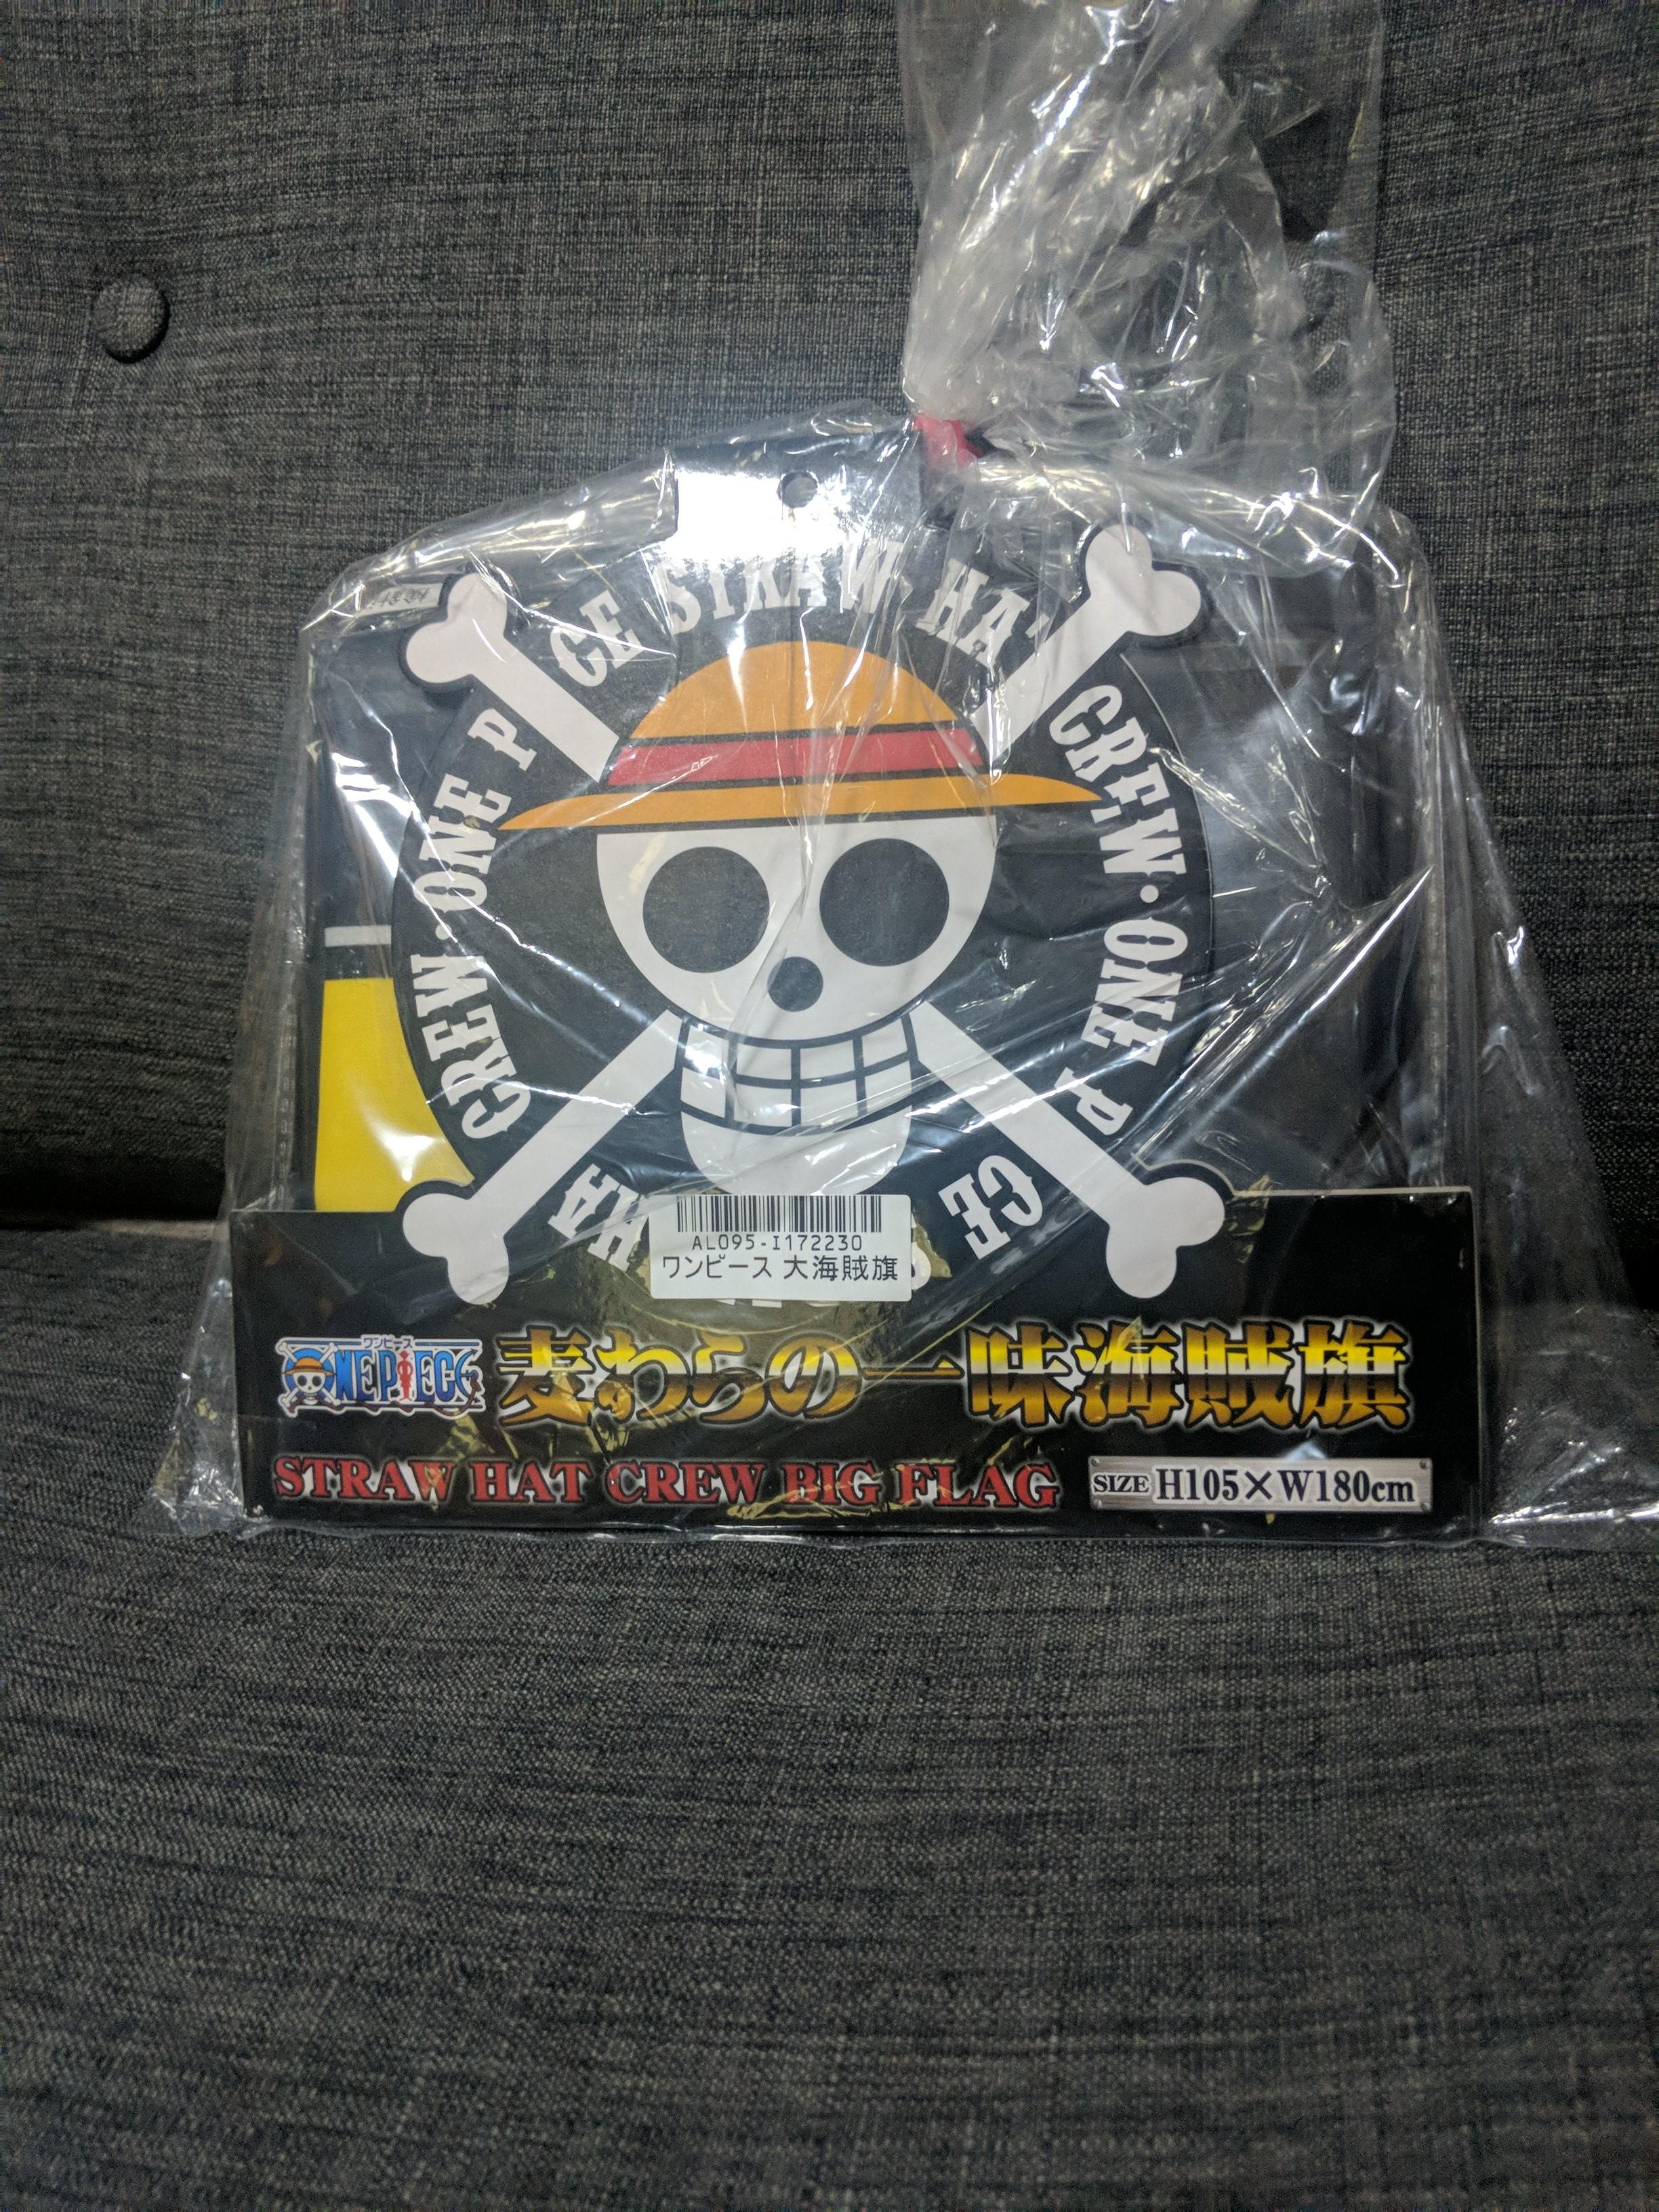 One Piece Luffy Jolly Roger Flag Hobbies Toys Toys Games On Carousell